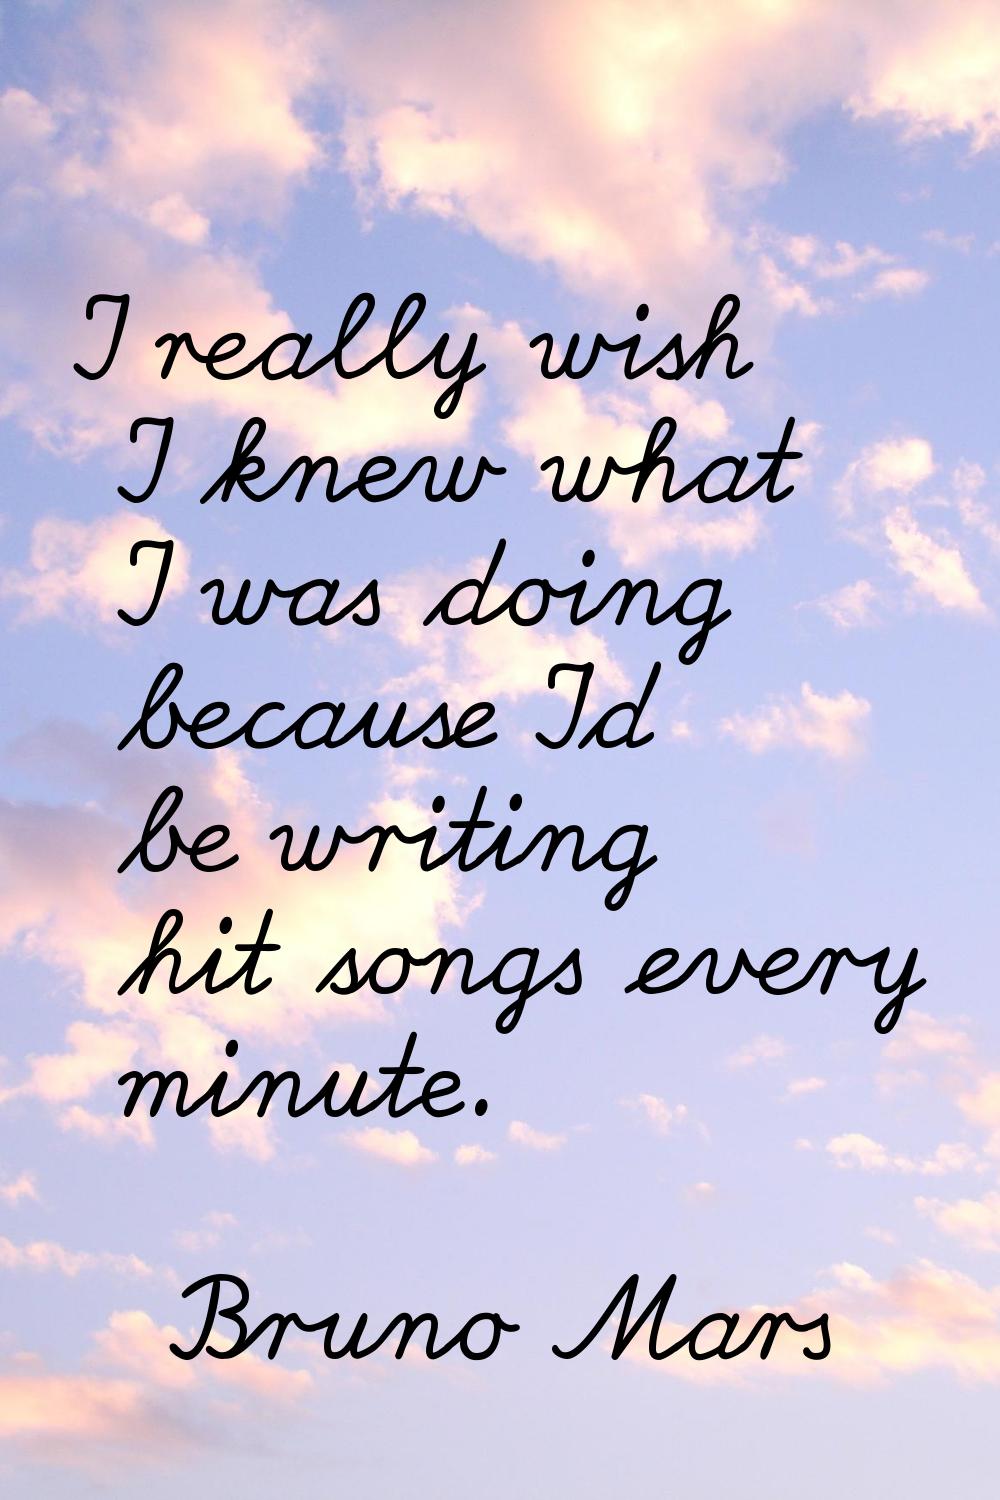 I really wish I knew what I was doing because I'd be writing hit songs every minute.